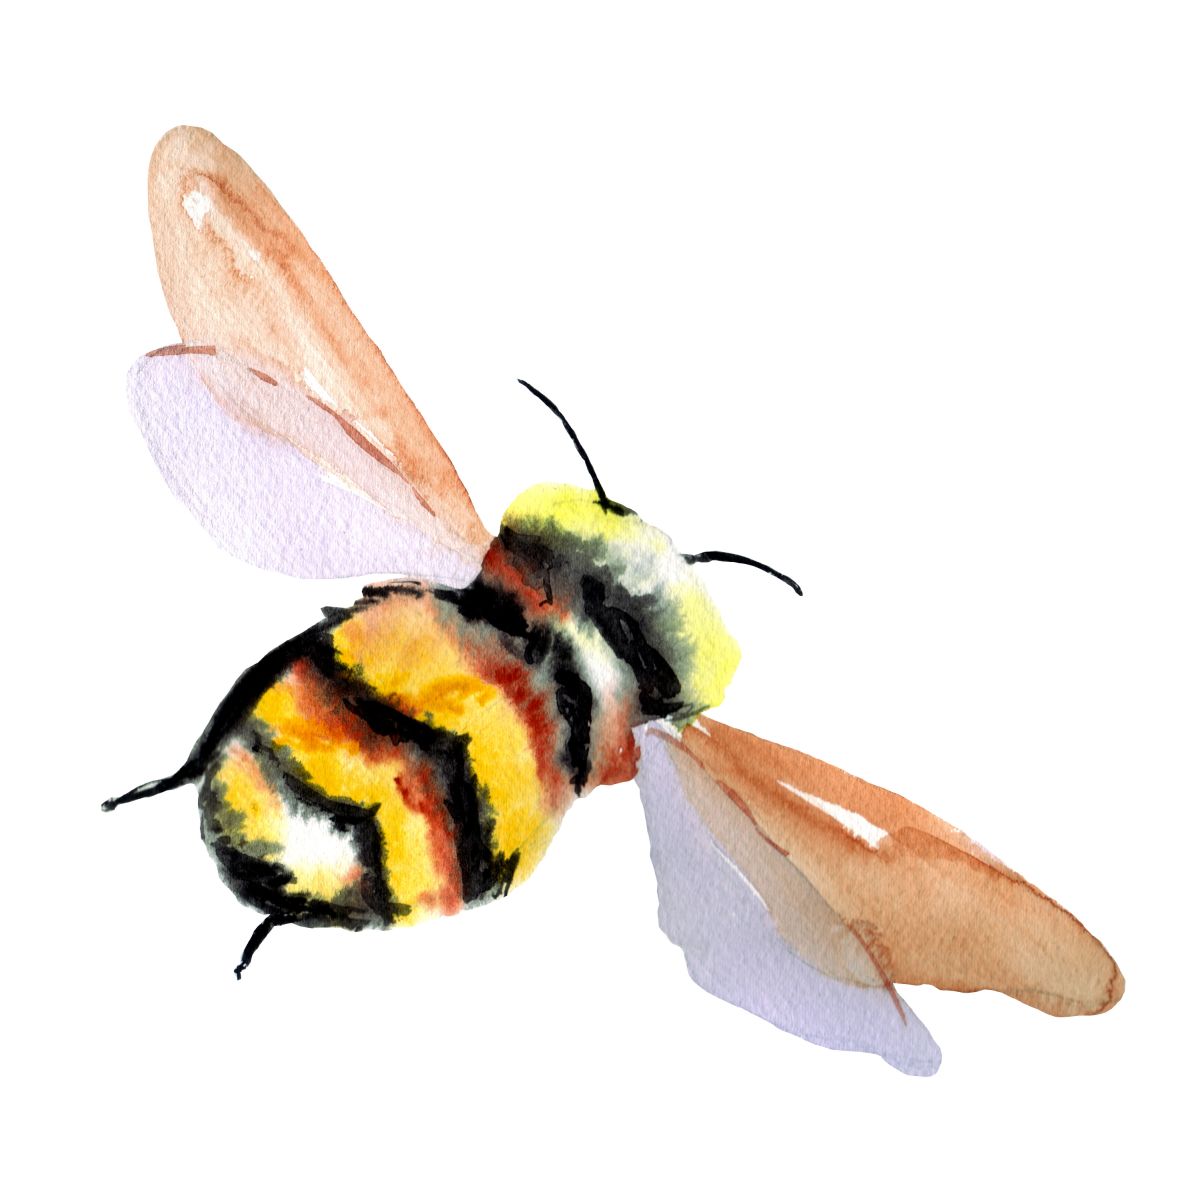 How To Draw A Bee